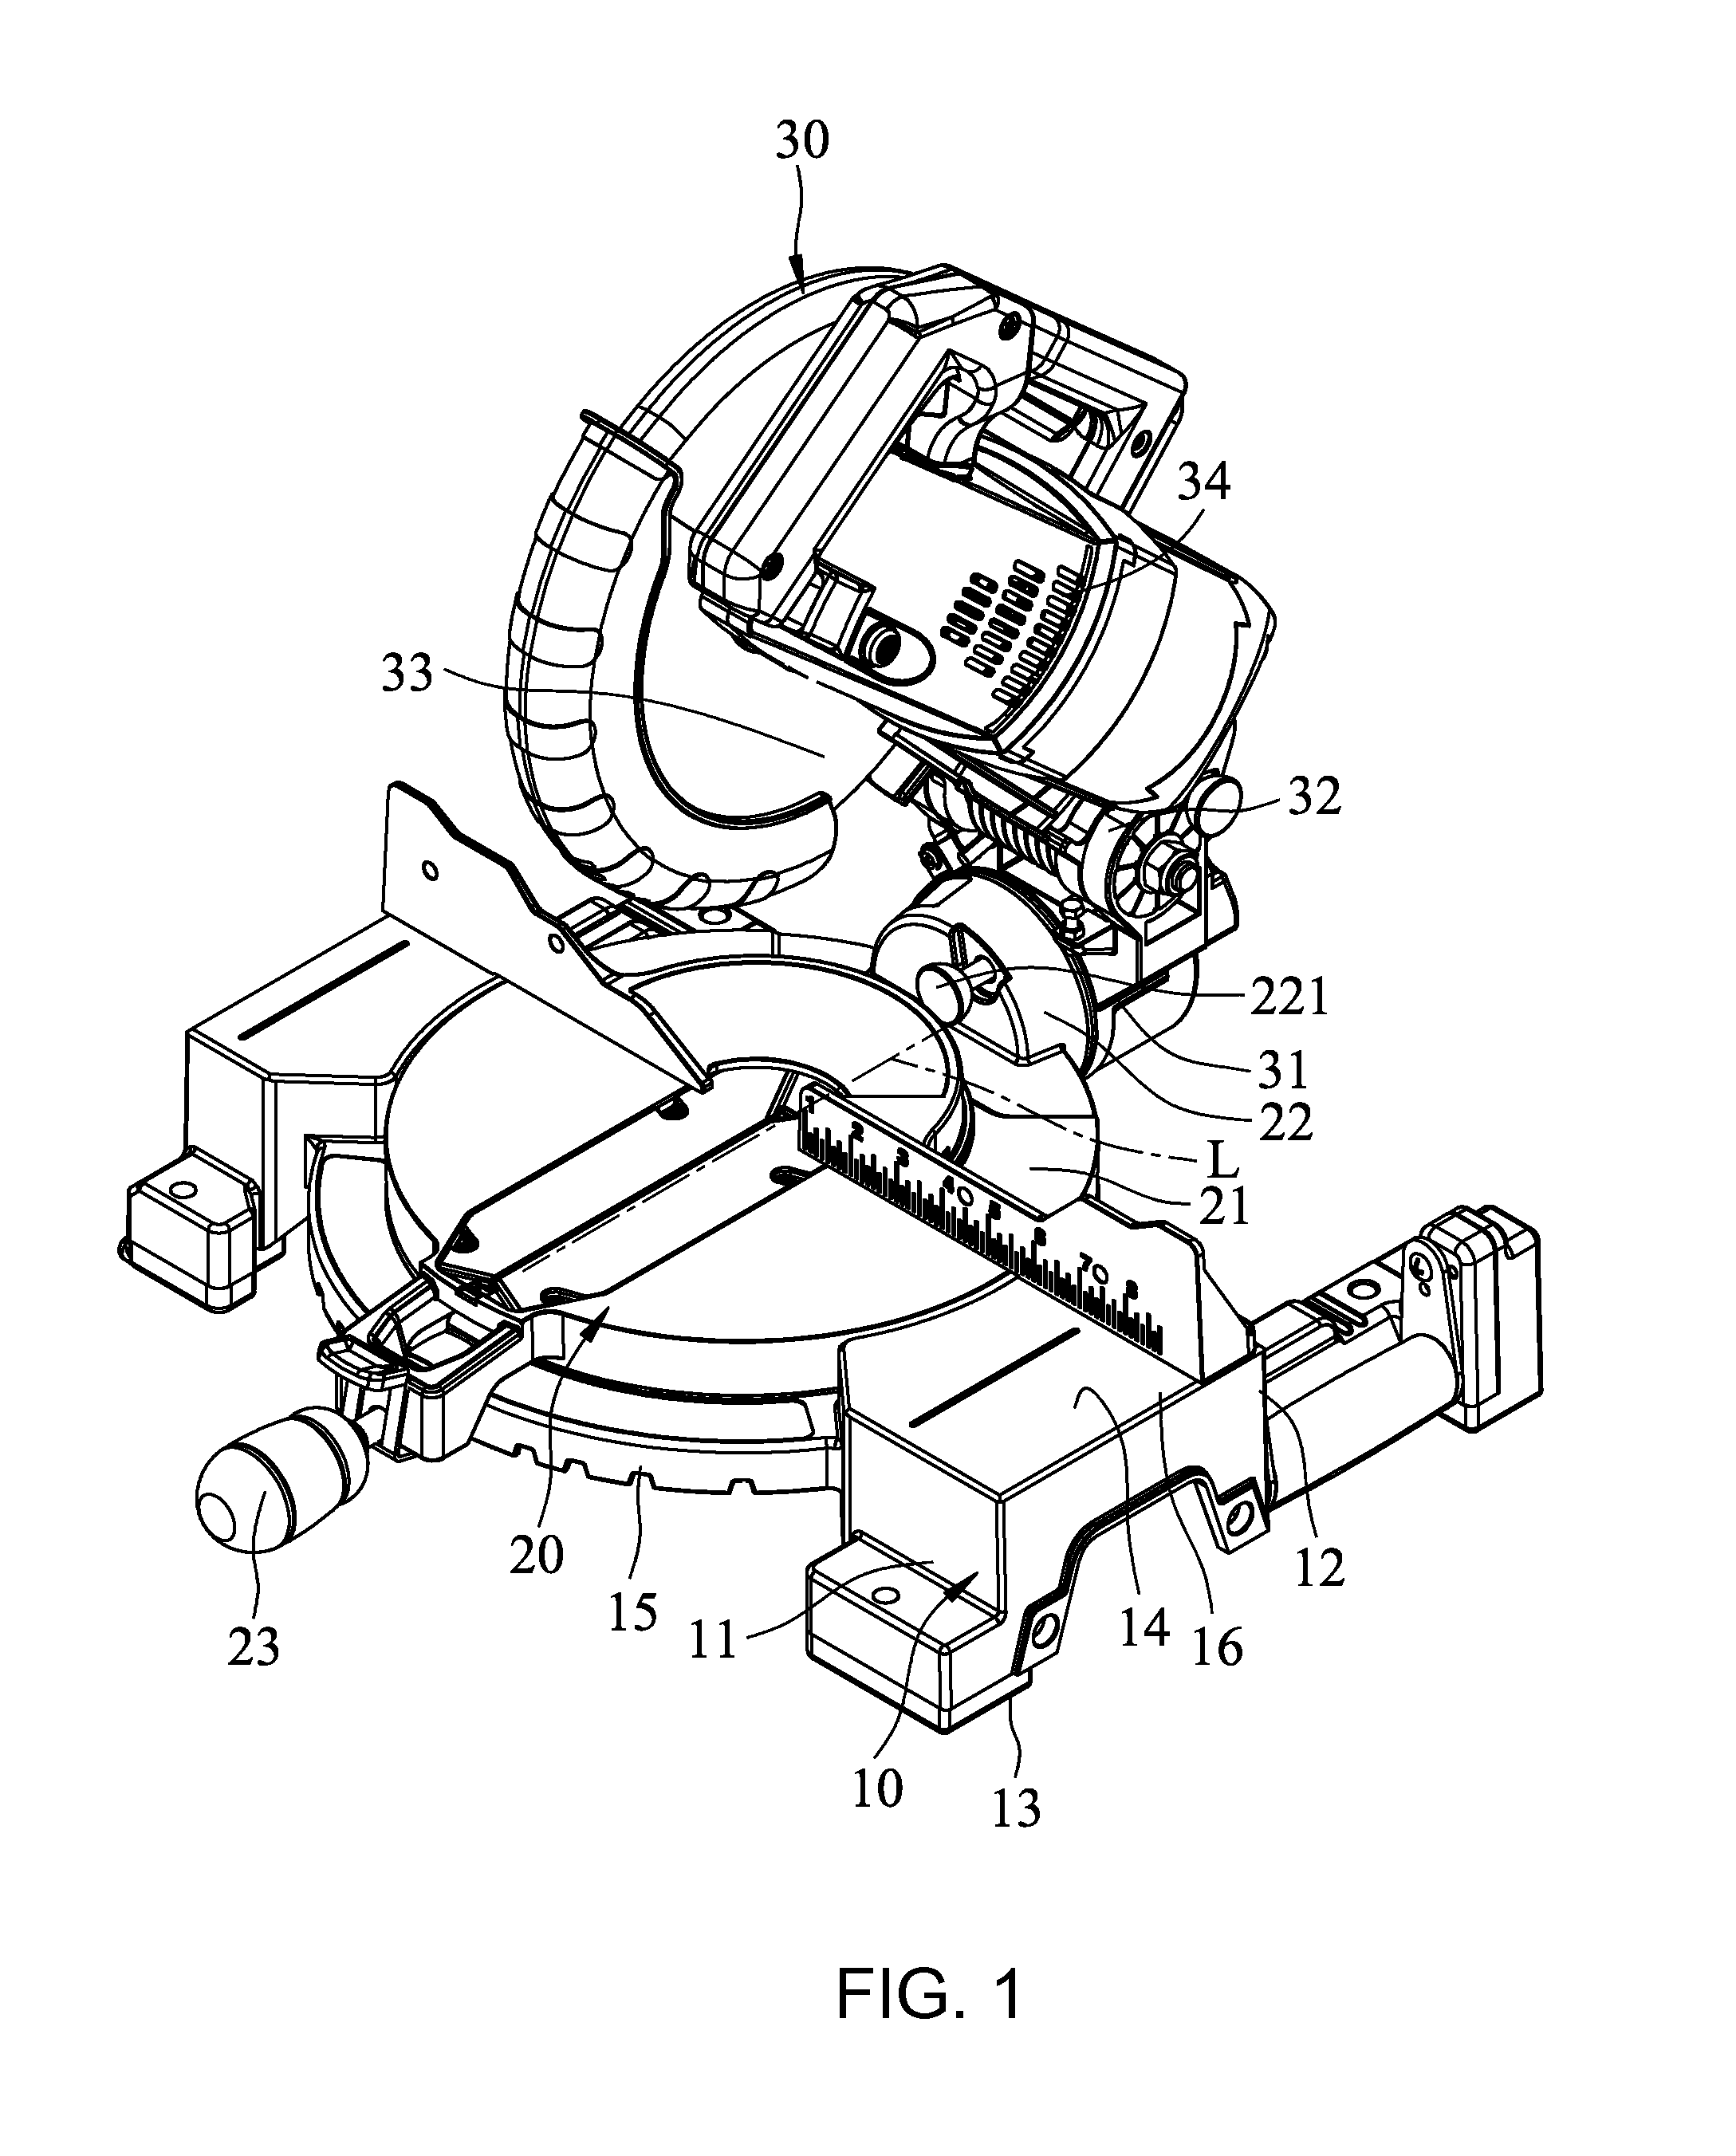 Foldable miter saw having a safety device